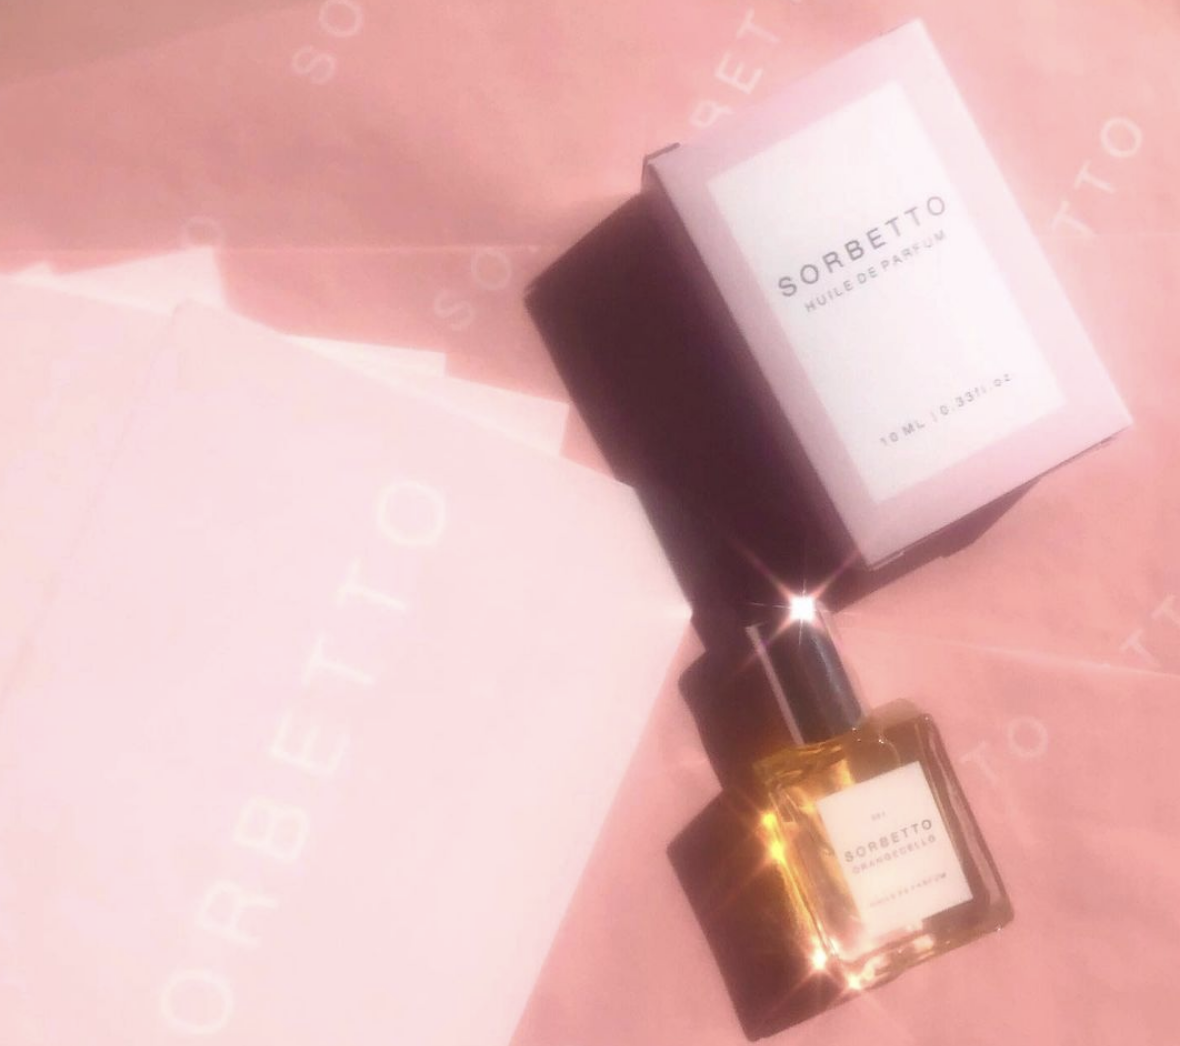 Sorbetto Fragrance and box on pink surface.